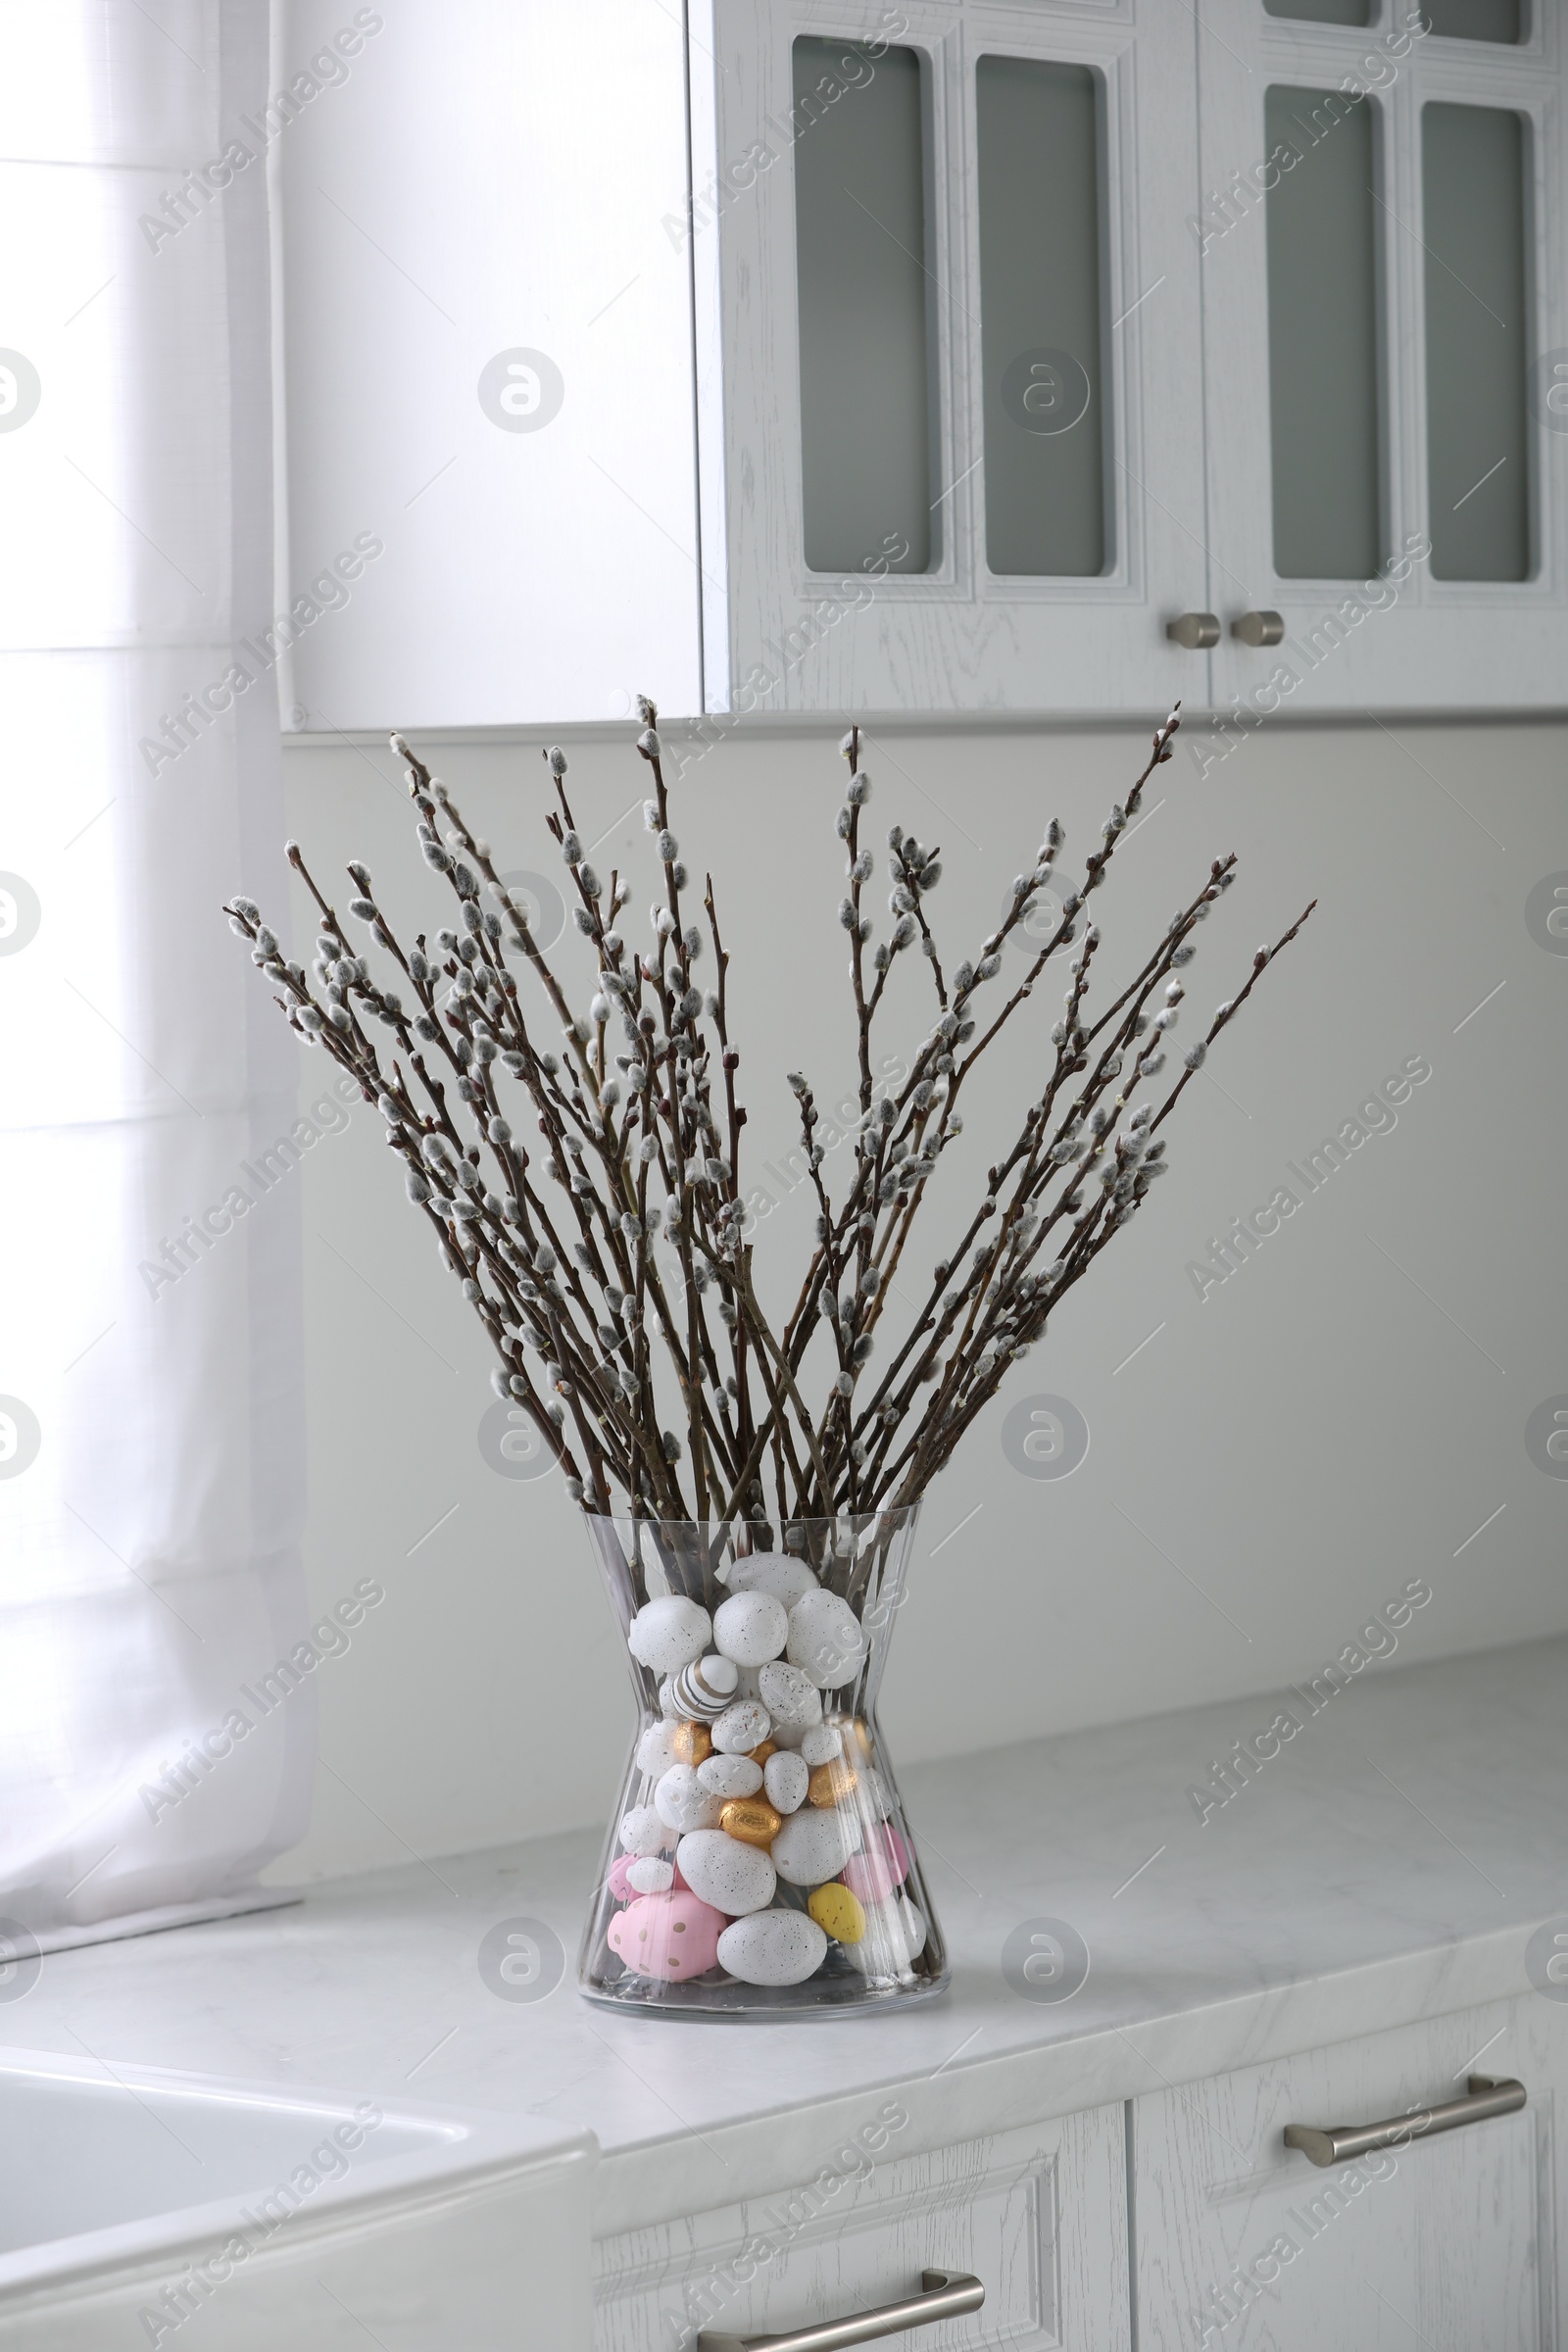 Photo of Vase with beautiful pussy willow branches and painted eggs on countertop in kitchen. Easter decor